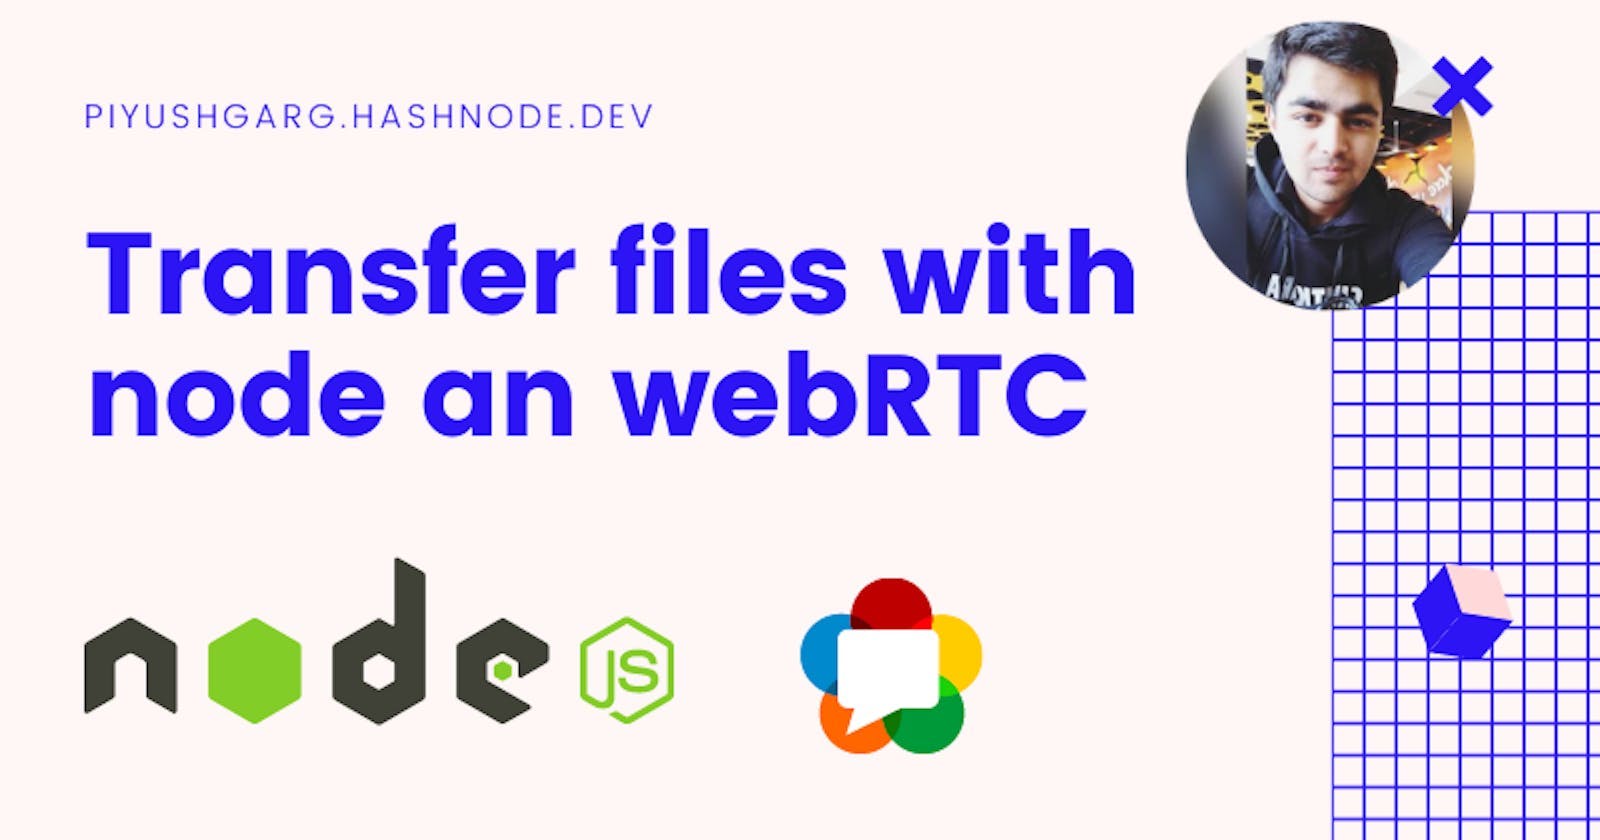 How to build a file transfer application with node and webRTC